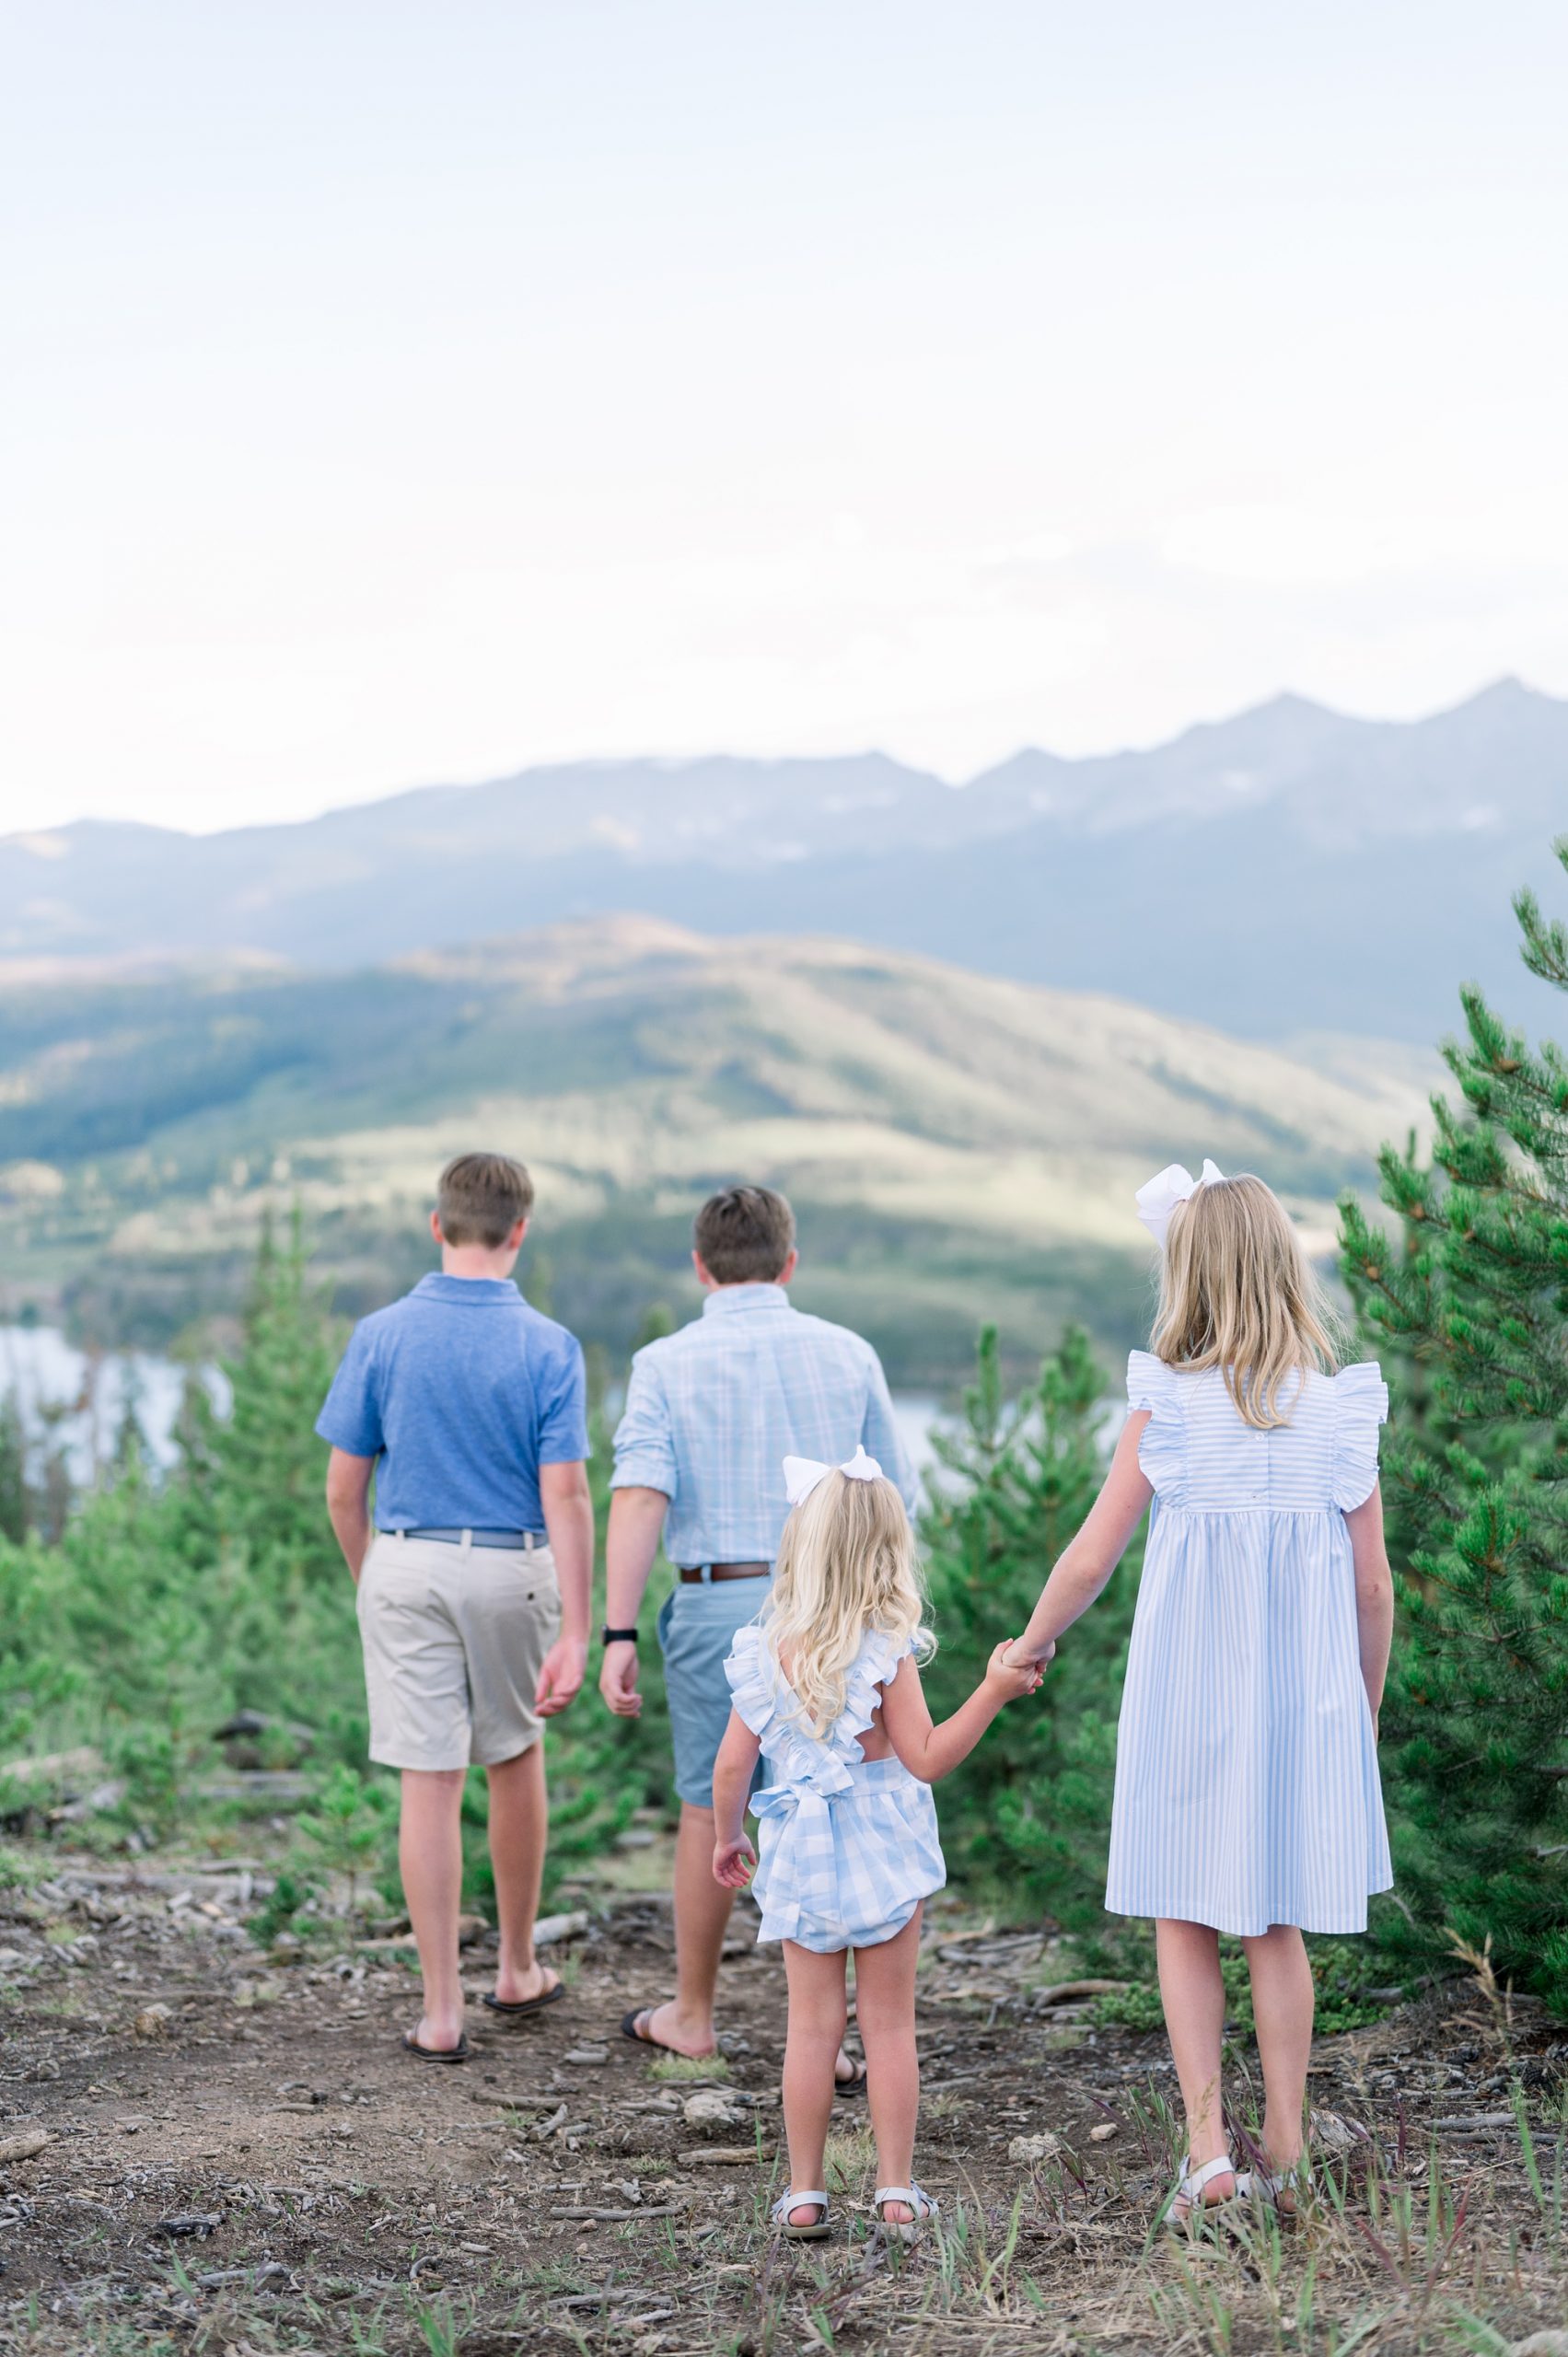 Adorable family of 6 gets picturesque family portraits done, while on vacation, at an overlook at Lake Dillon Colorado.